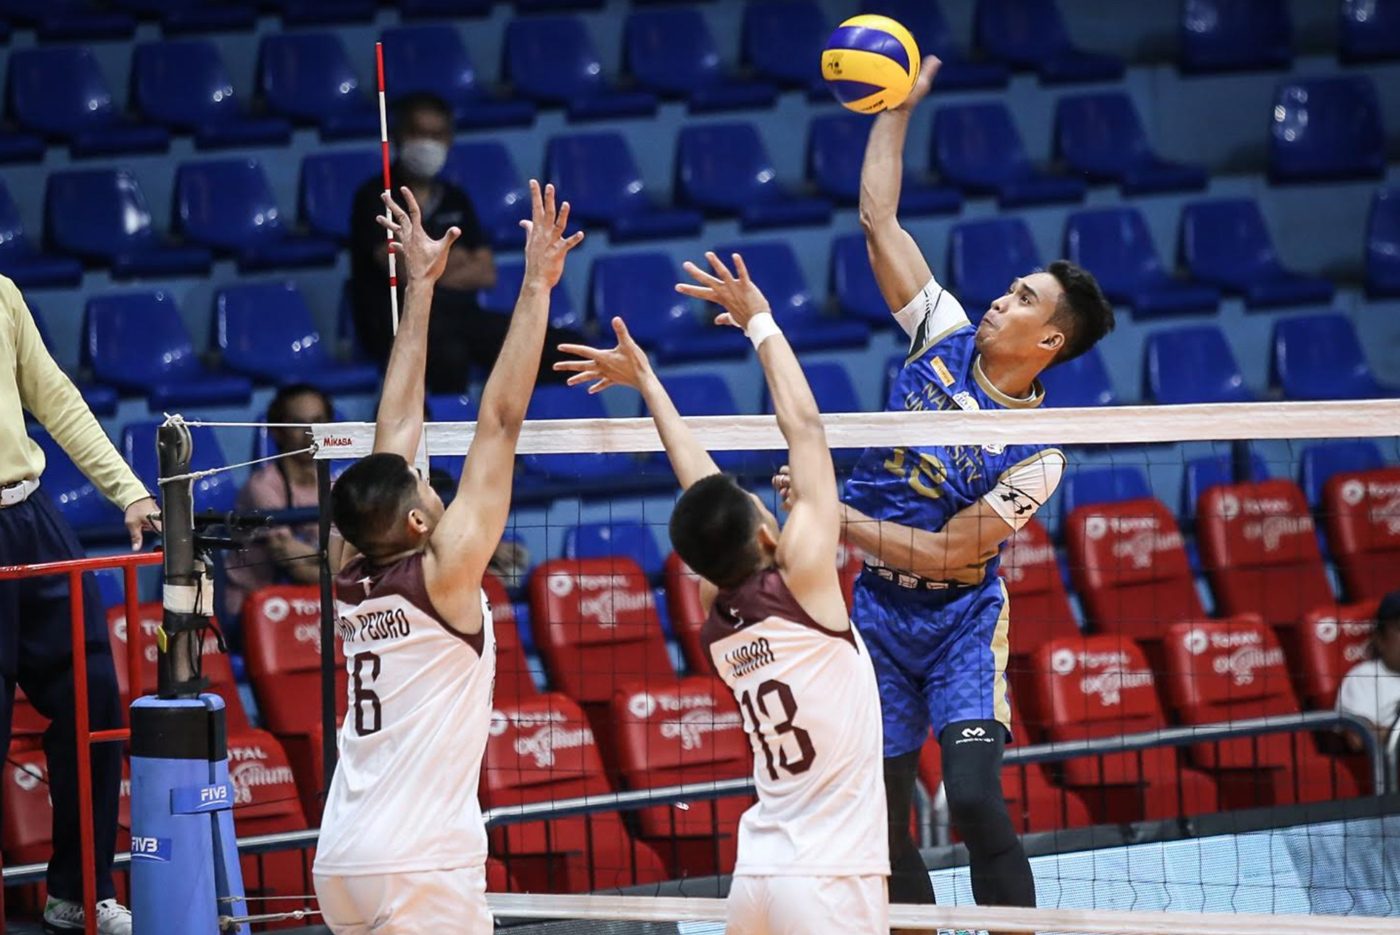 NU stretches streak to 5, Ateneo secures solo 3rd